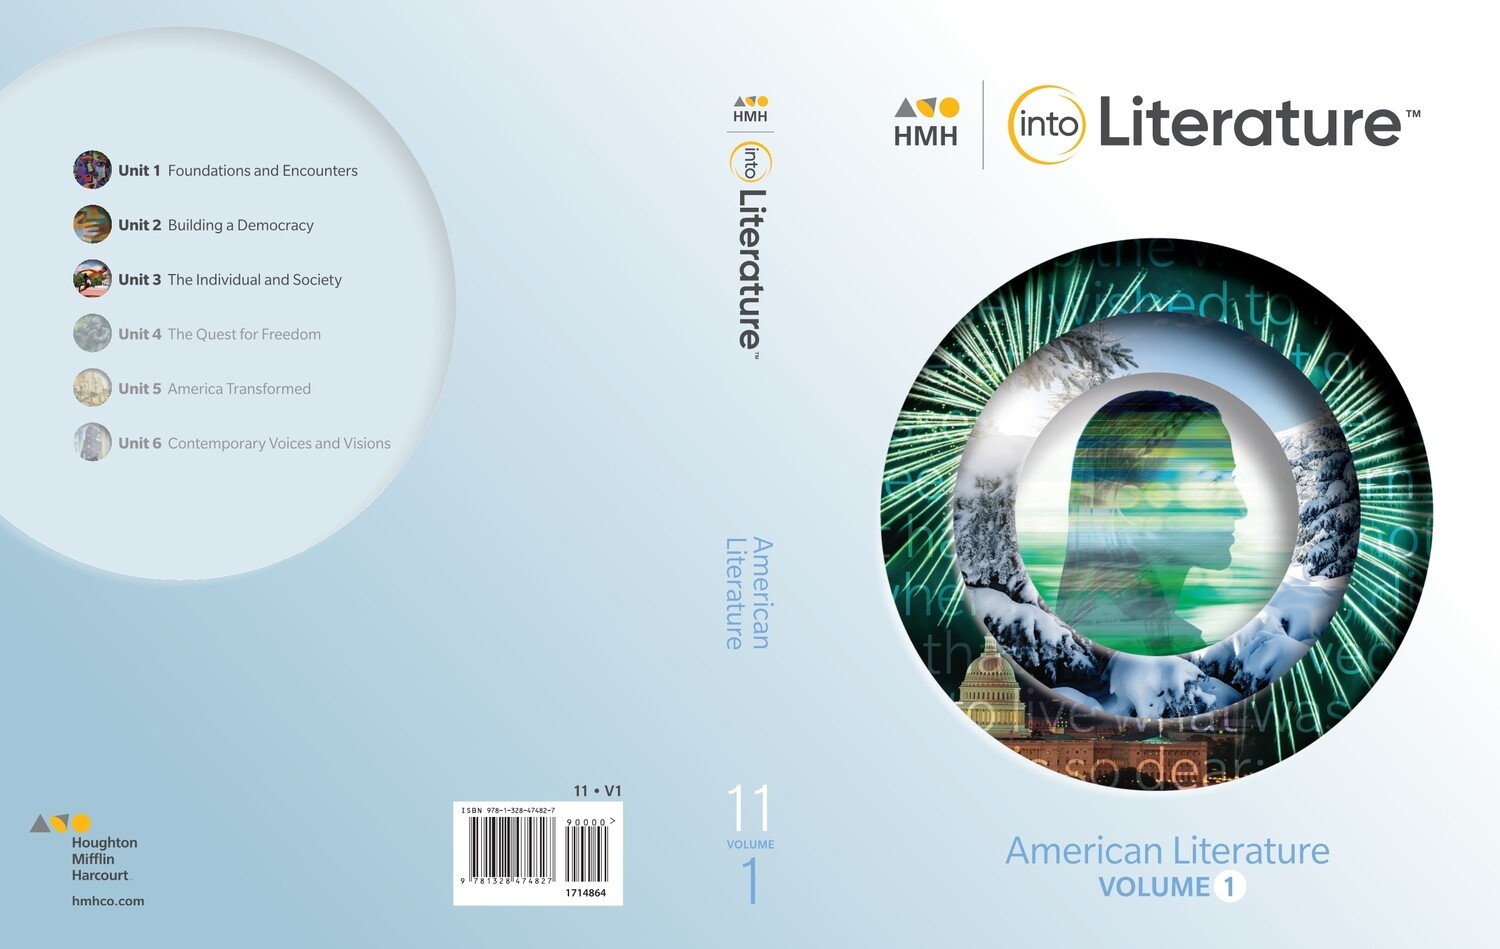 ELEVENTH GRADE - INTO LITERATURE COMPREHENSIVE STUDENT RESOURCE PACKAGE GRADE 11 (W/WRITE-IN AND 1-YEAR DIGITAL) - HMH - 2020 - ISBN 9781328607508